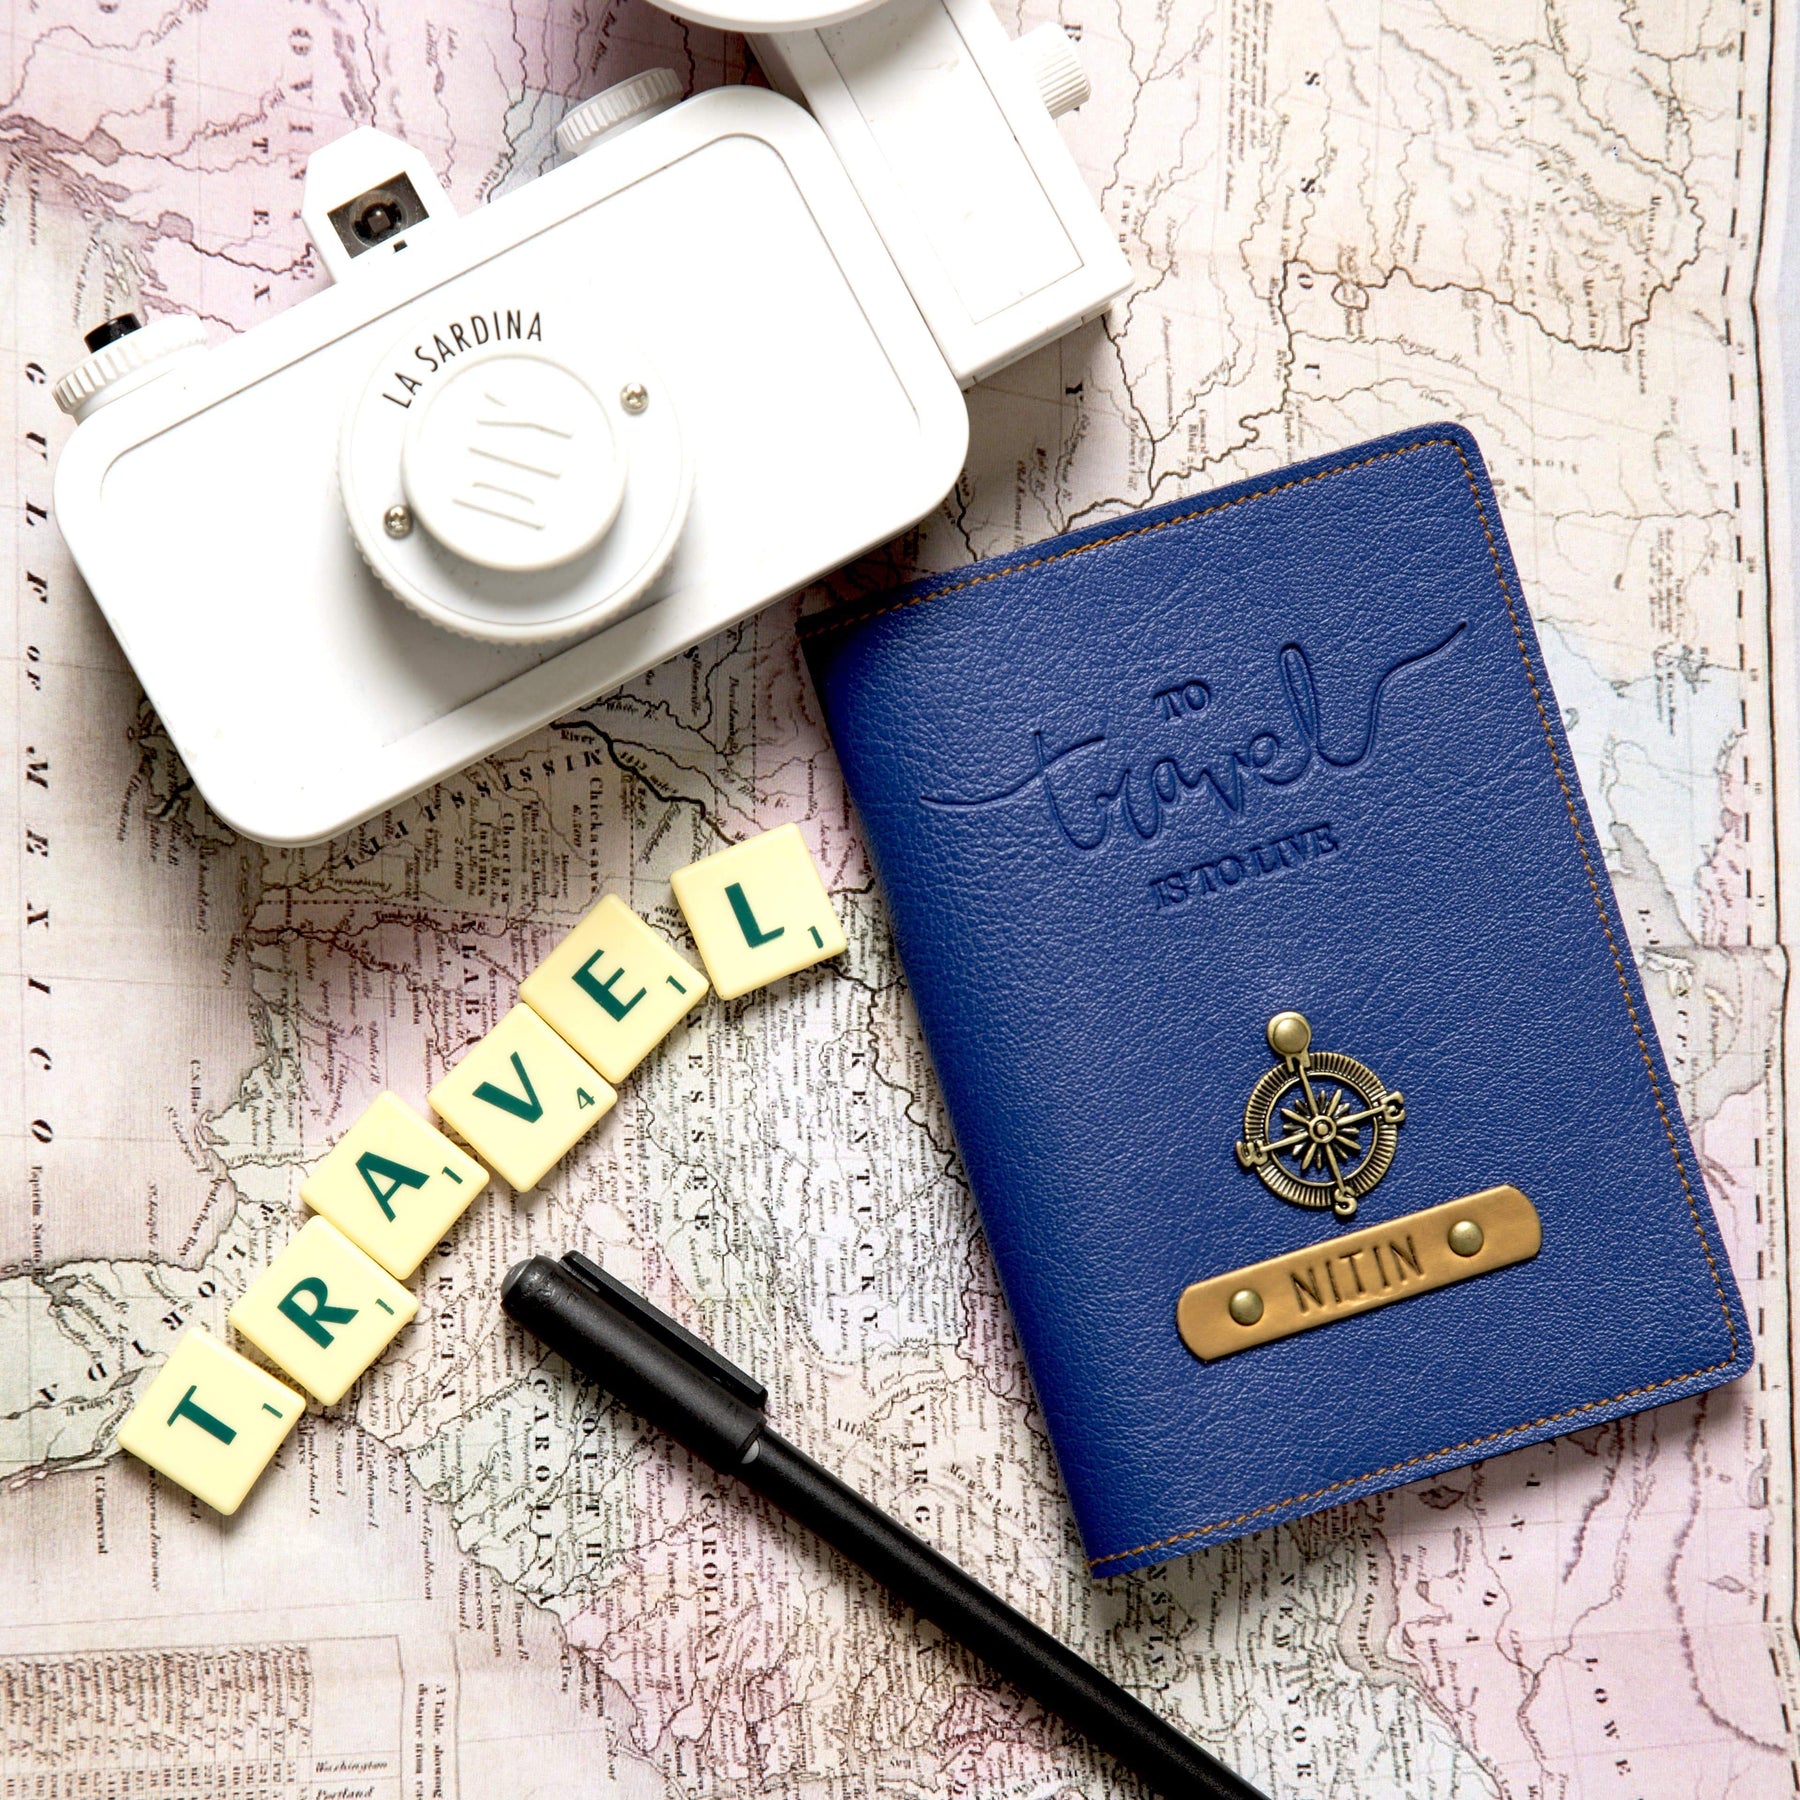 The Messy Corner Passport Cover Personalized Passport Cover - Travel is to Live